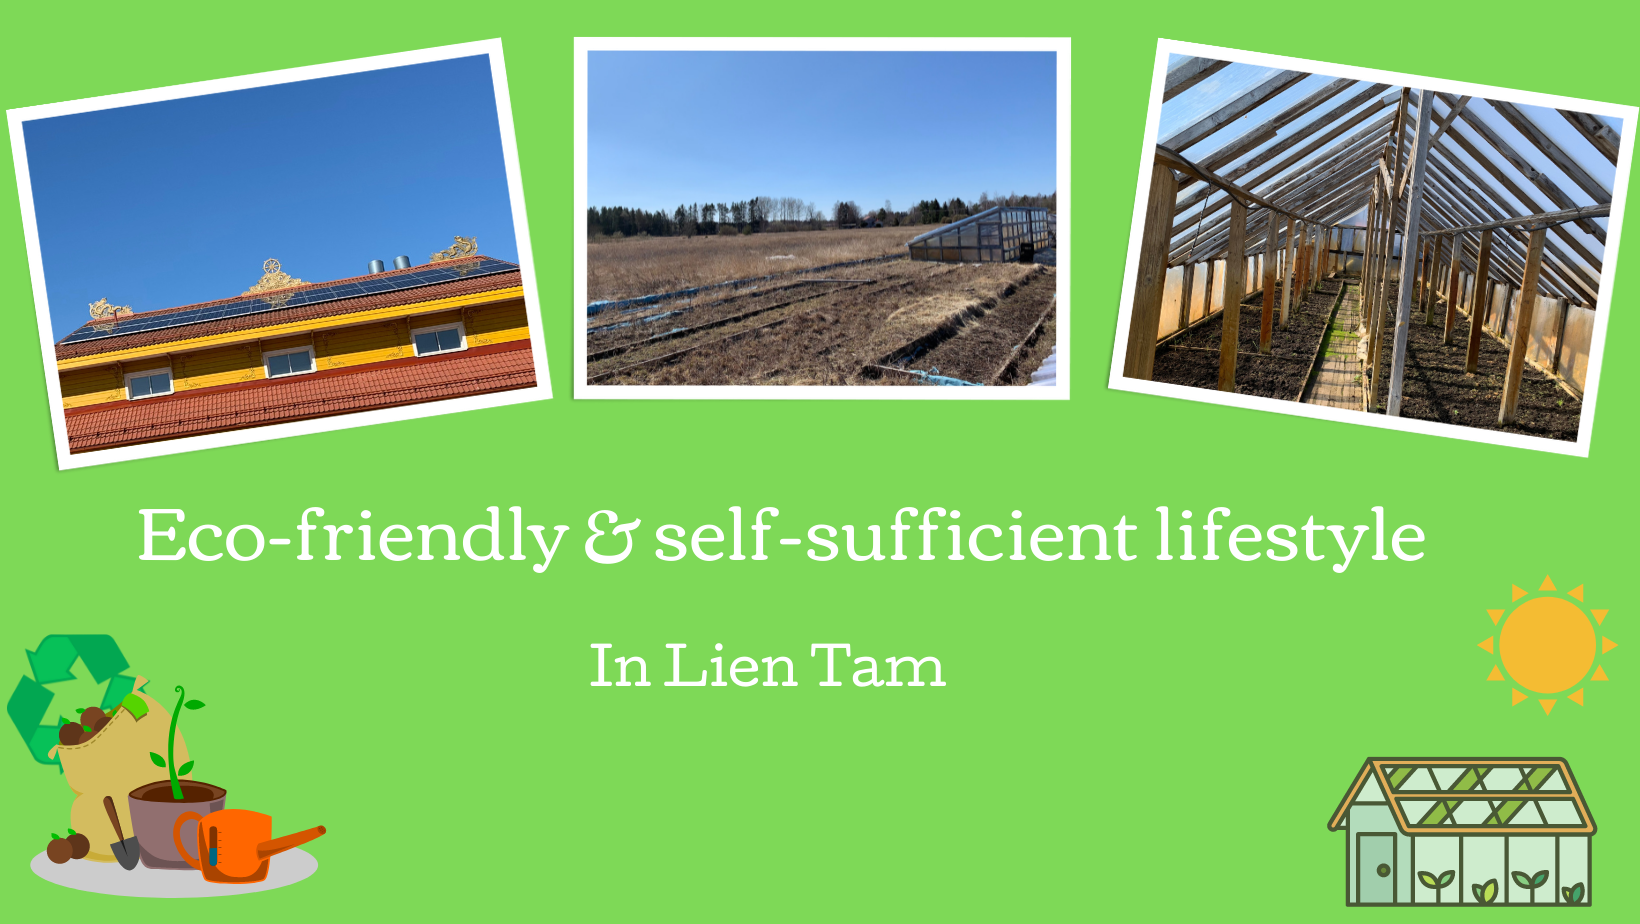 Eco friendly & self-sufficient lifestyle in Lien Tam monastery